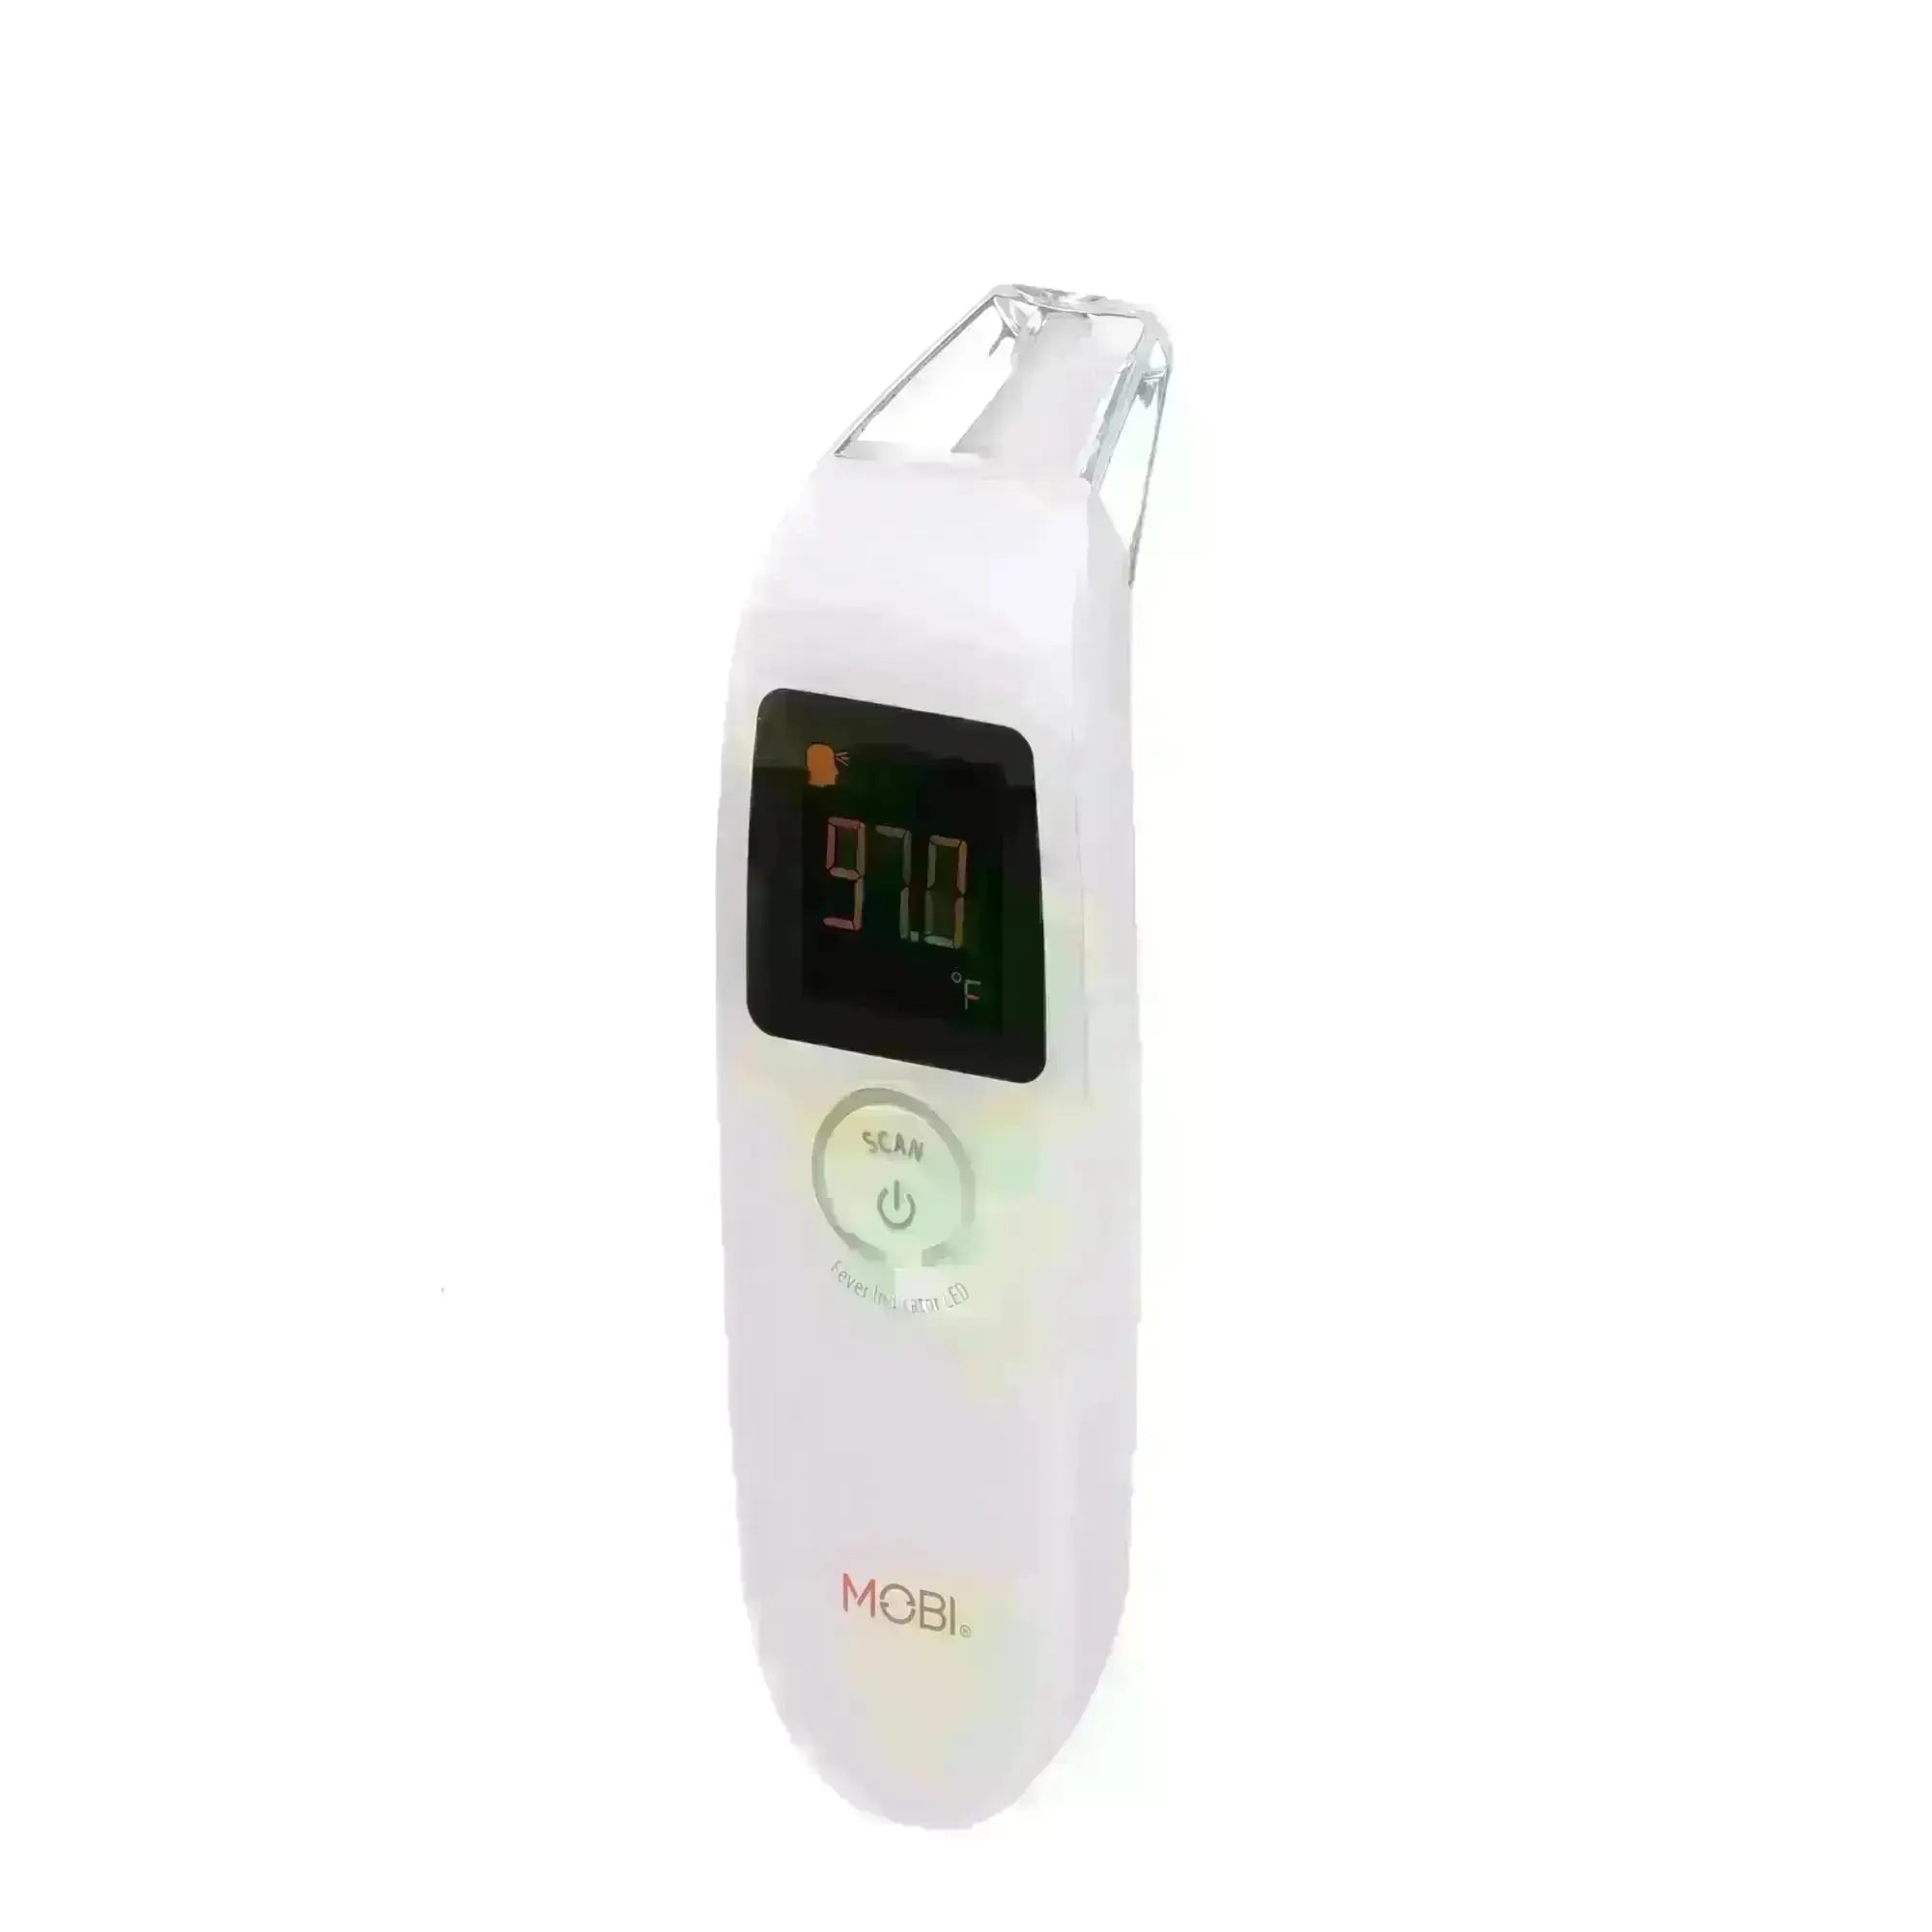 DualScan Health Check Ear & Forehead Thermometer with Medication Reminder Alarm